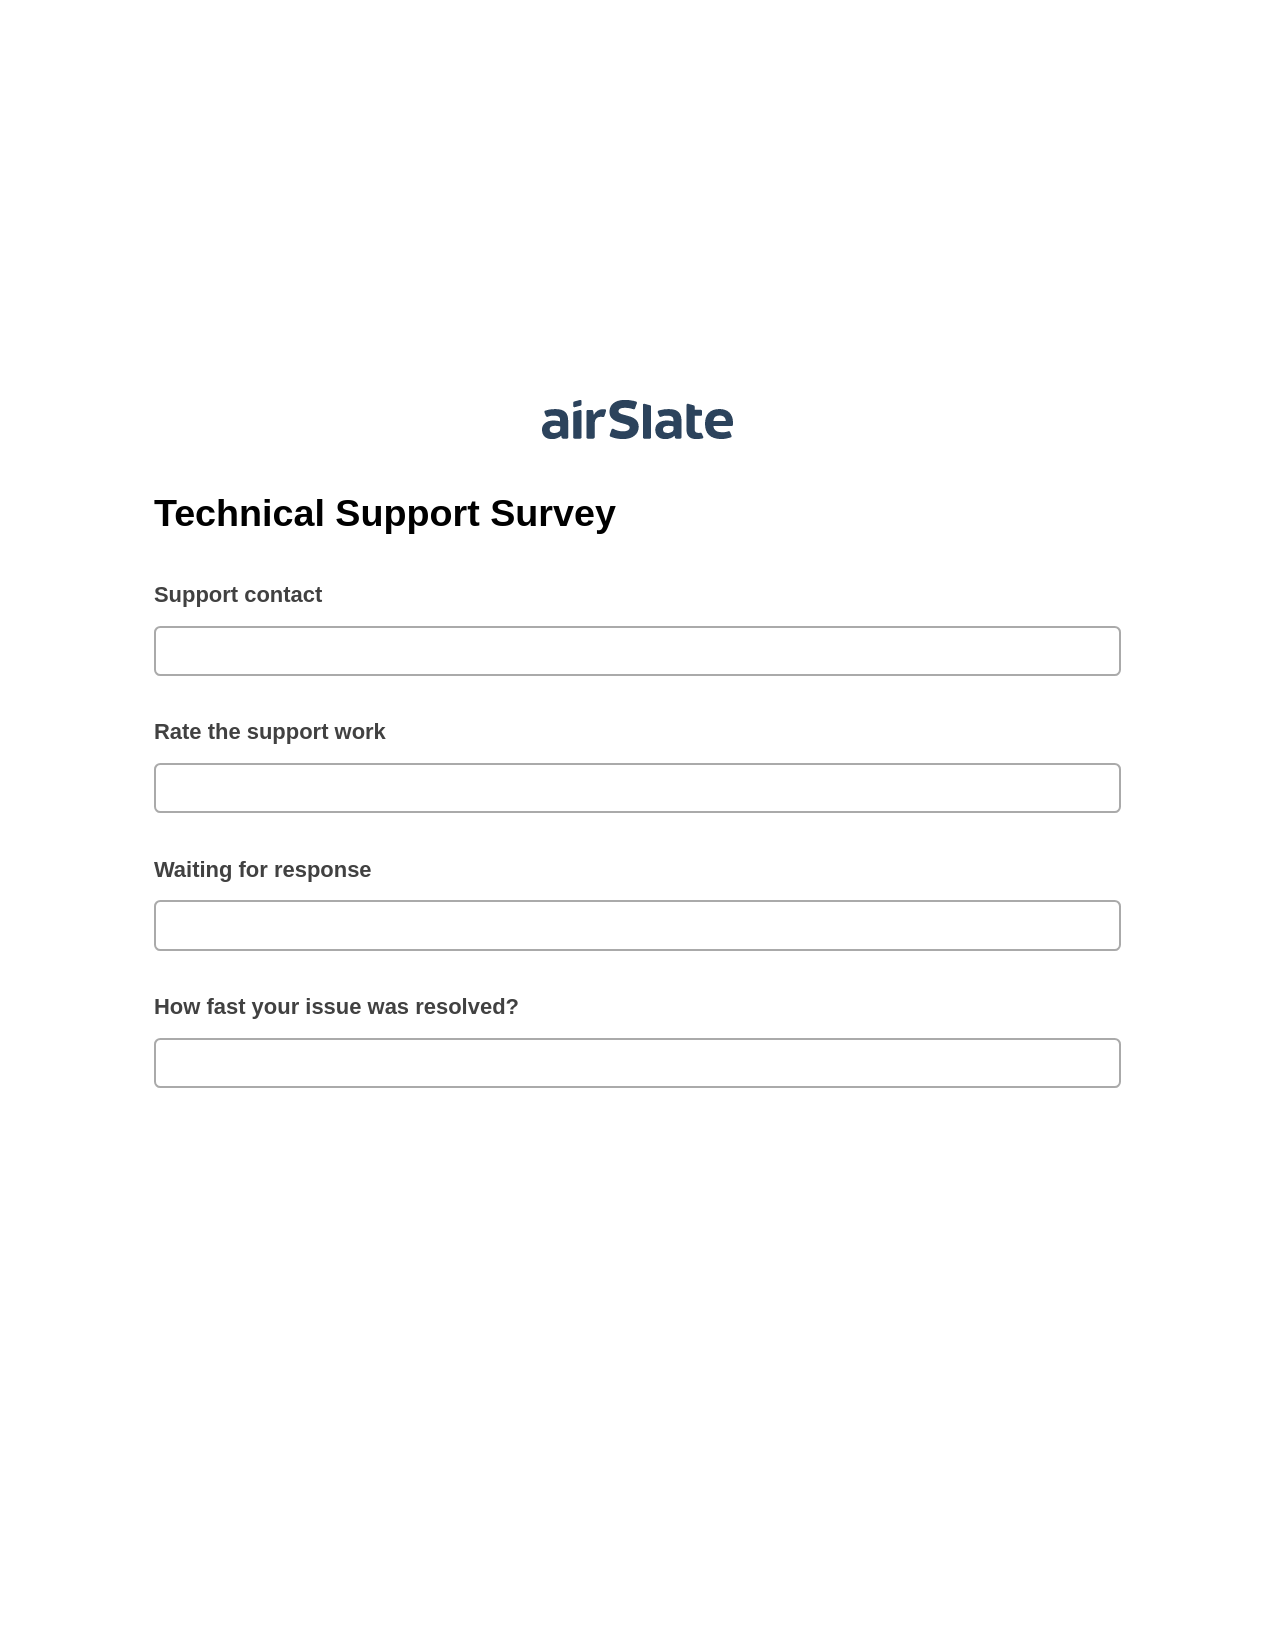 Technical Support Survey Pre-fill from CSV File Bot, Custom Field's Value Bot, Archive to SharePoint Folder Bot